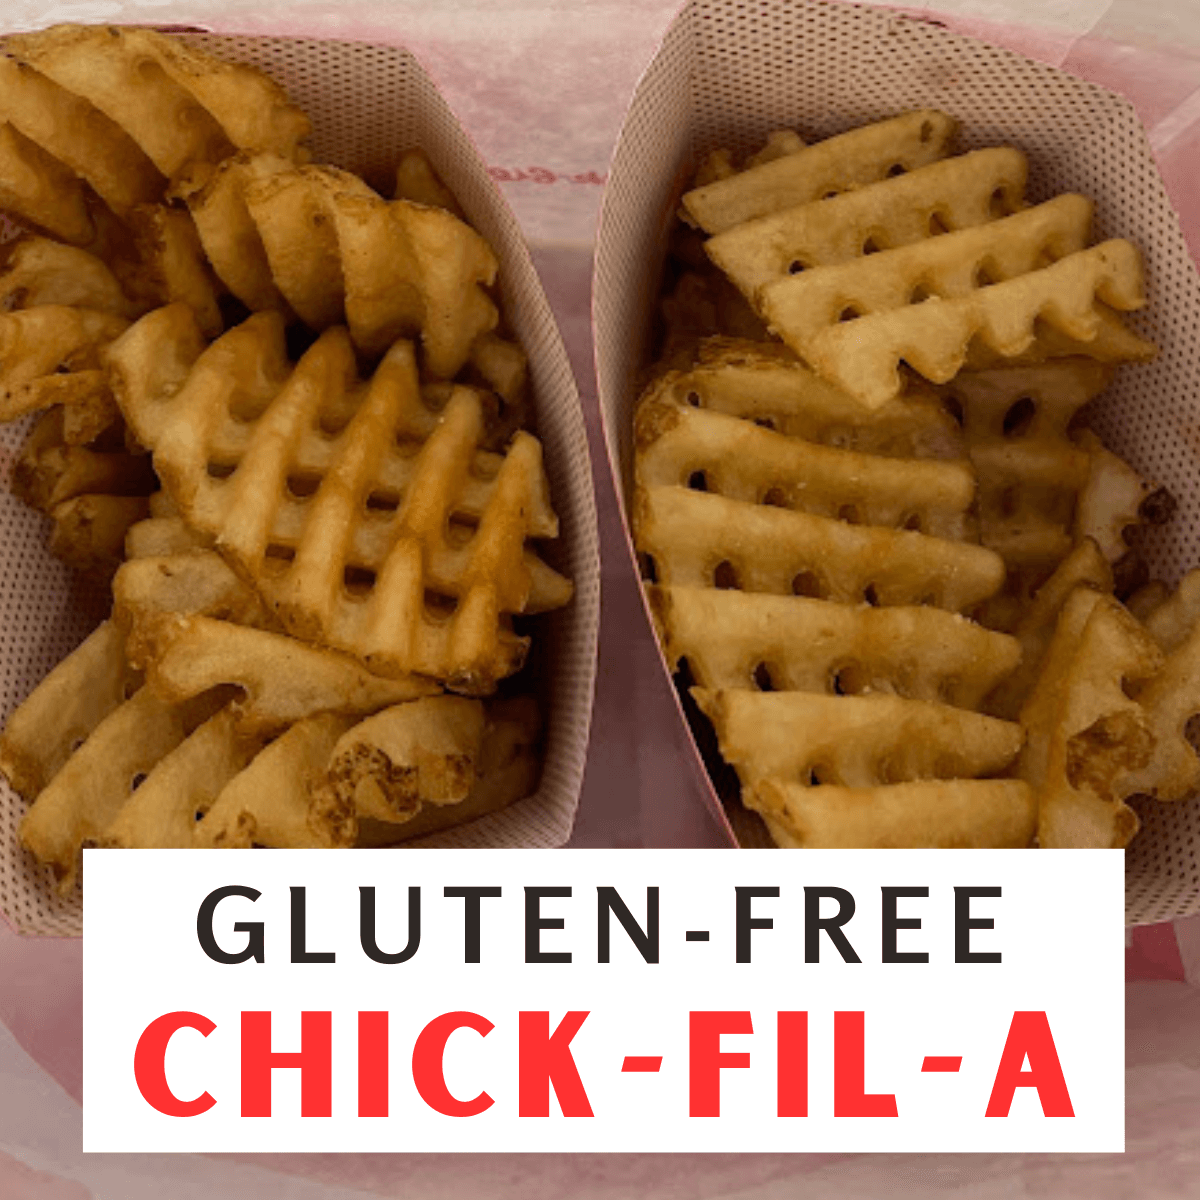 Gluten-free fries at Chick-Fil-A